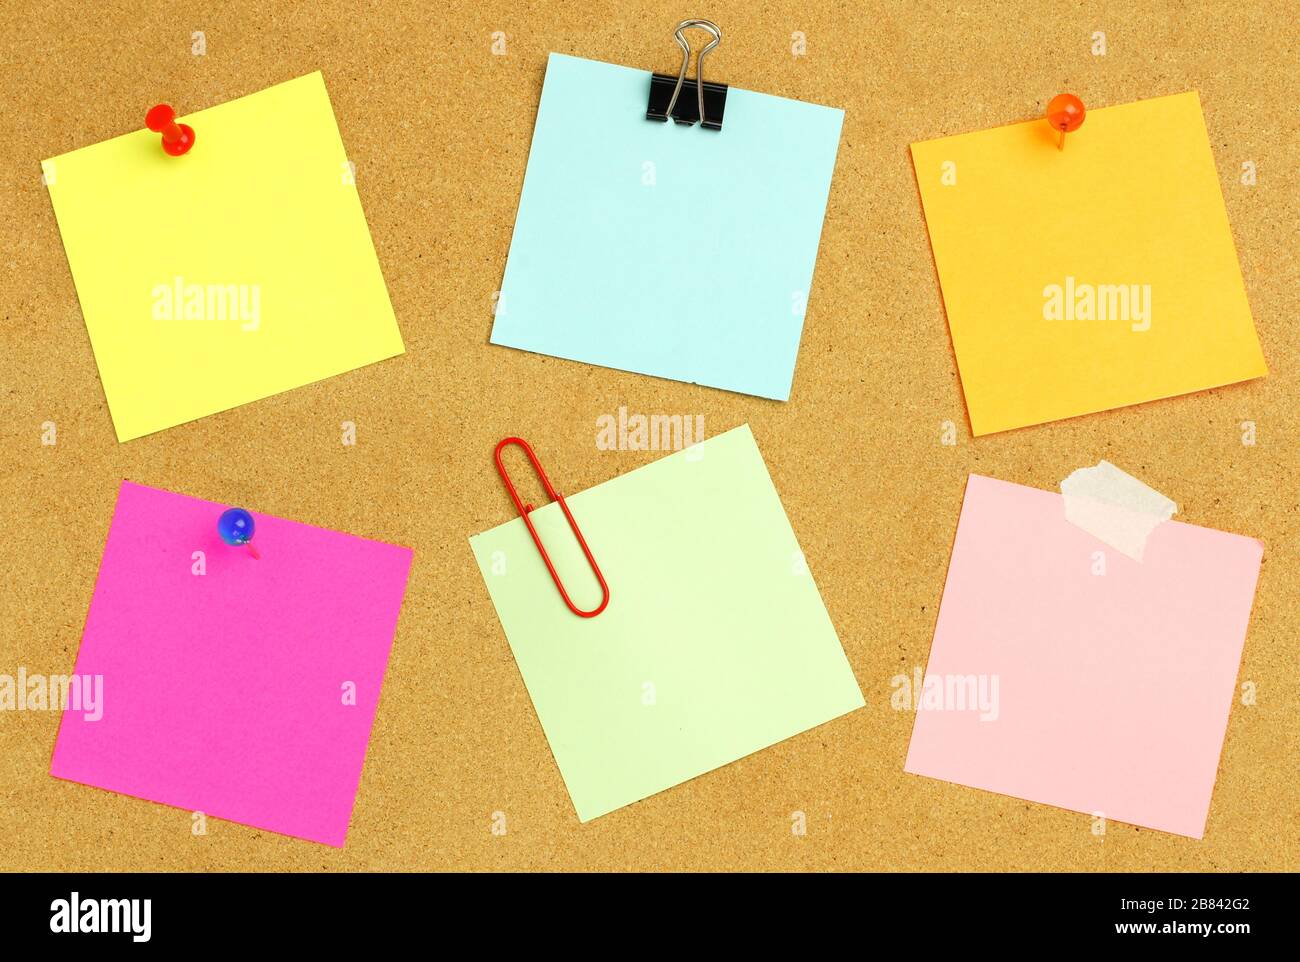 Blank sticky notes of various colors and fasteners on a bulletin board Stock Photo